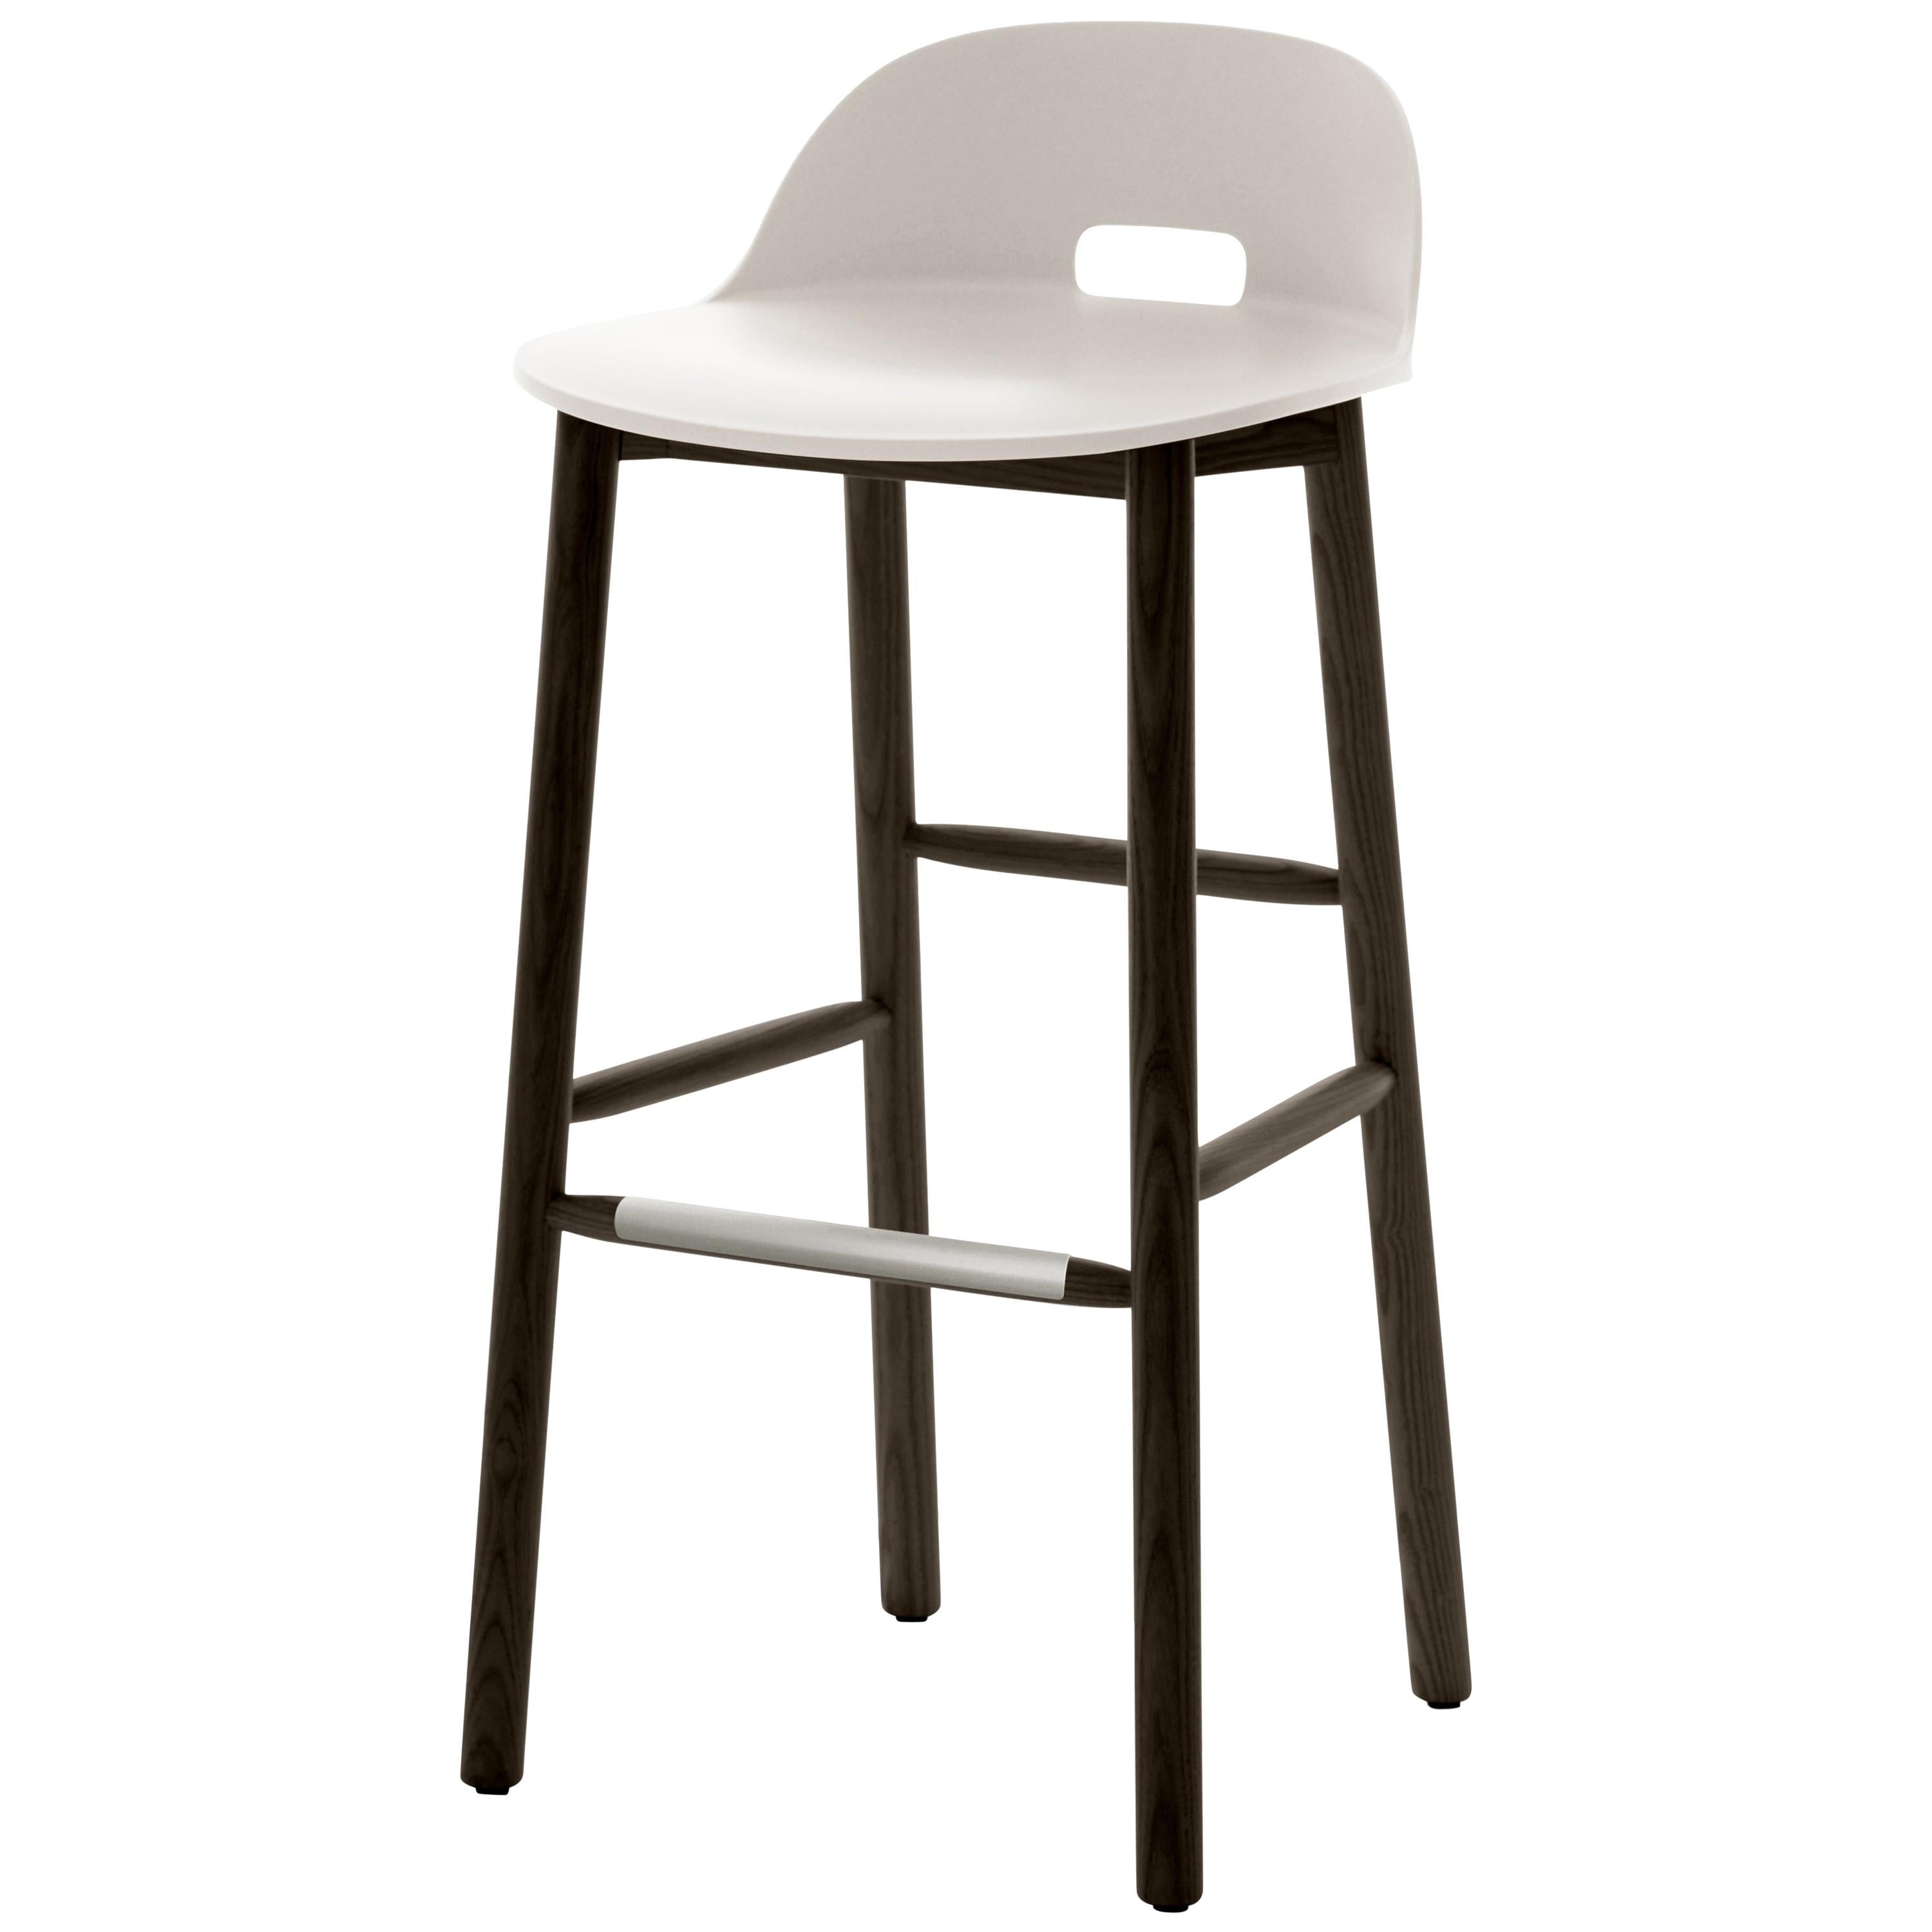 Emeco Alfi Barstool in White and Dark Ash with Low Back by Jasper Morrison For Sale